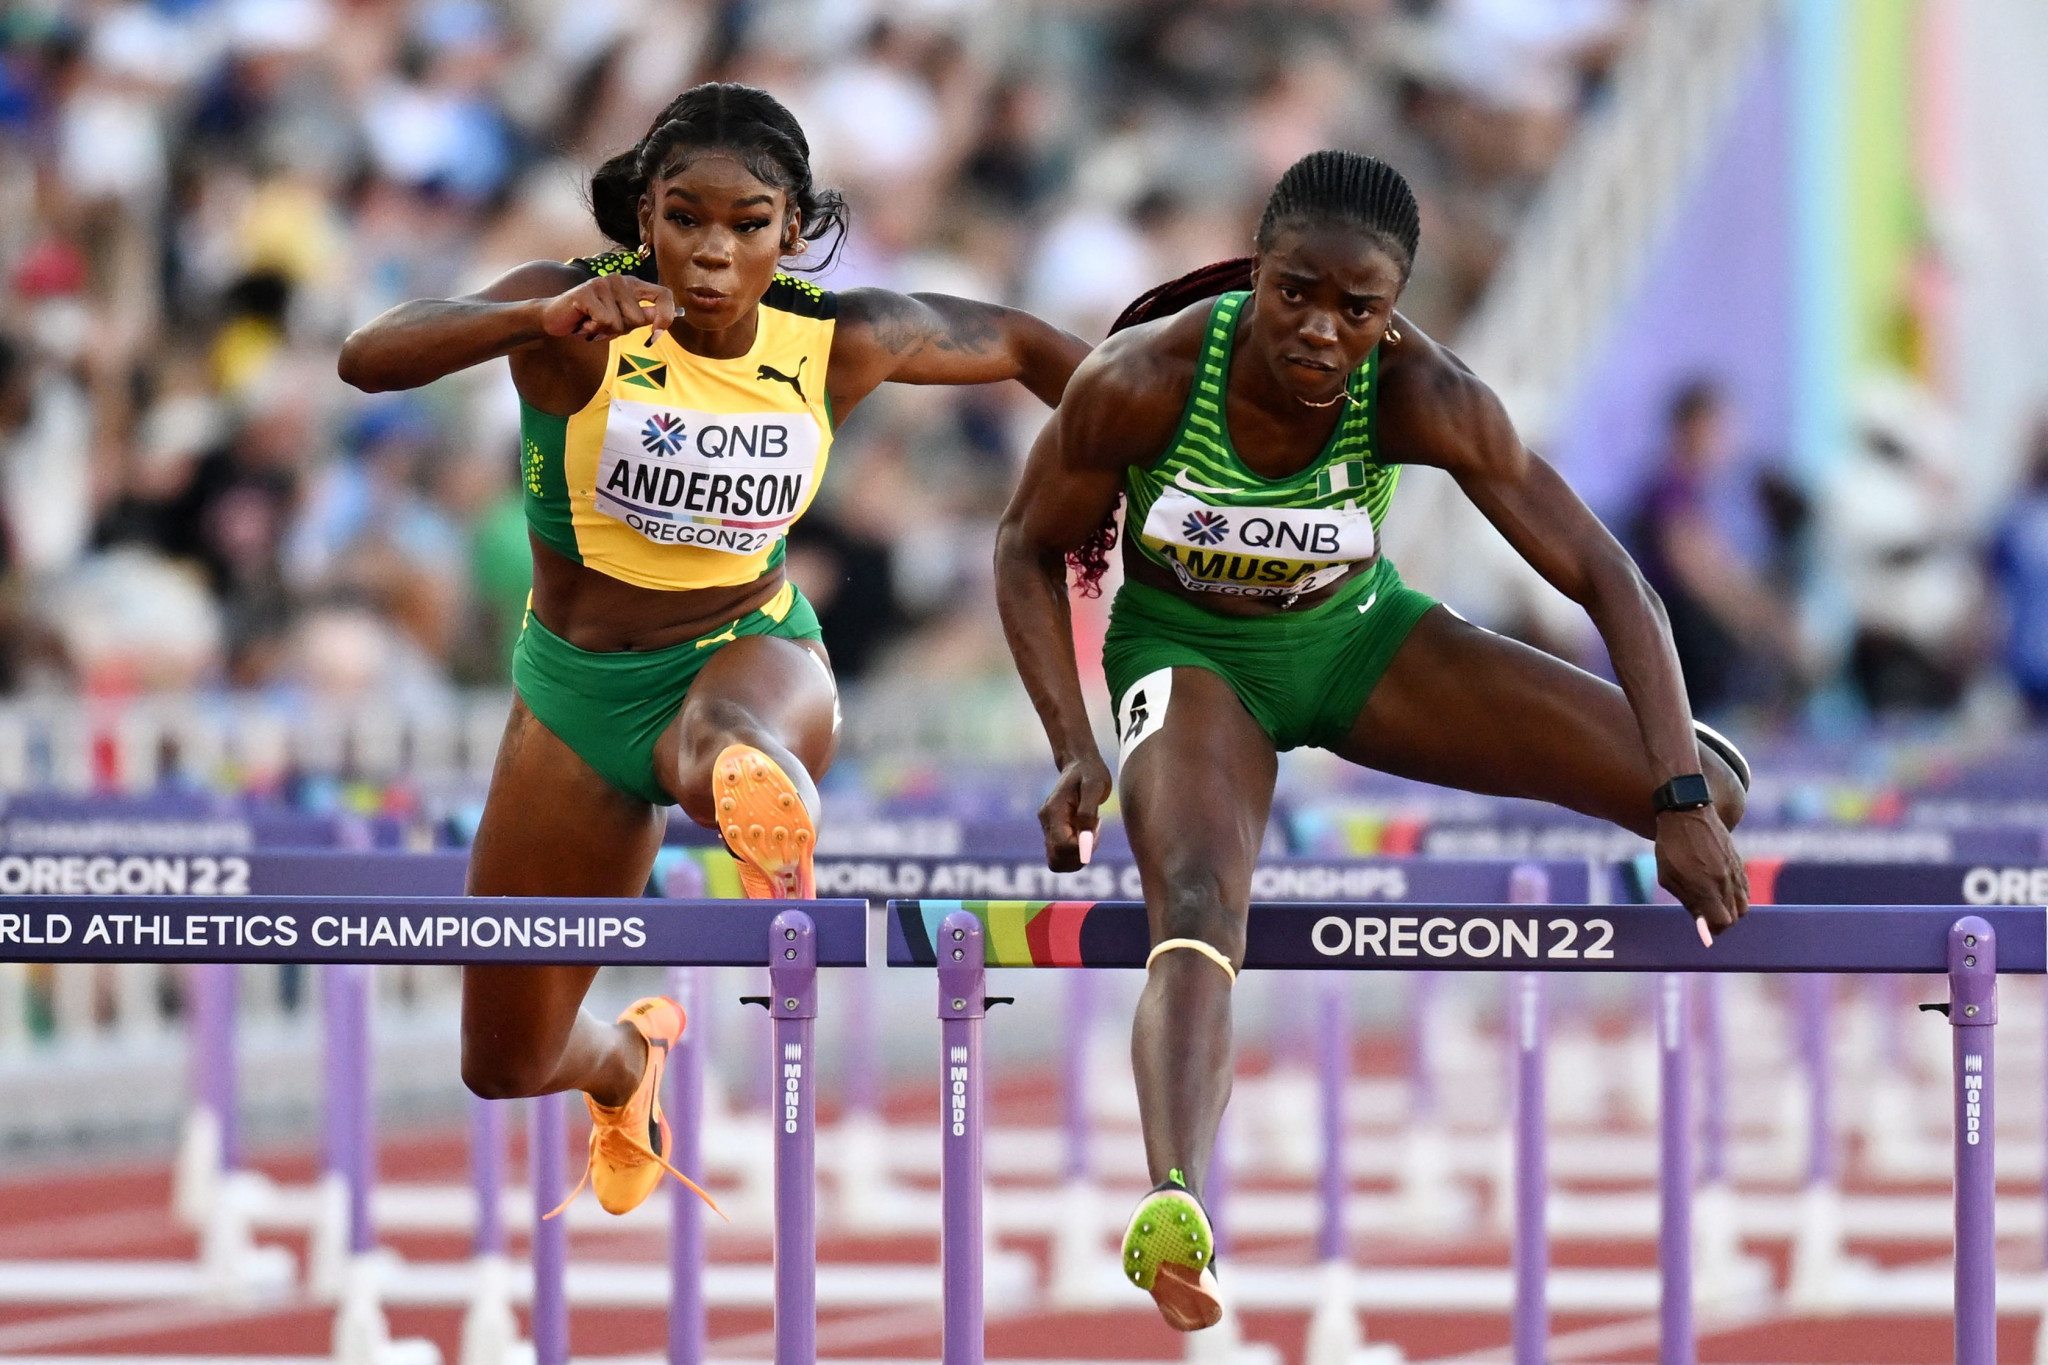 Tobi Amusan raced to the gold medal in the 100m hurdles at the World Athletics Championships in Eugene having set a controversial world record in the semi-finals ©Getty Images